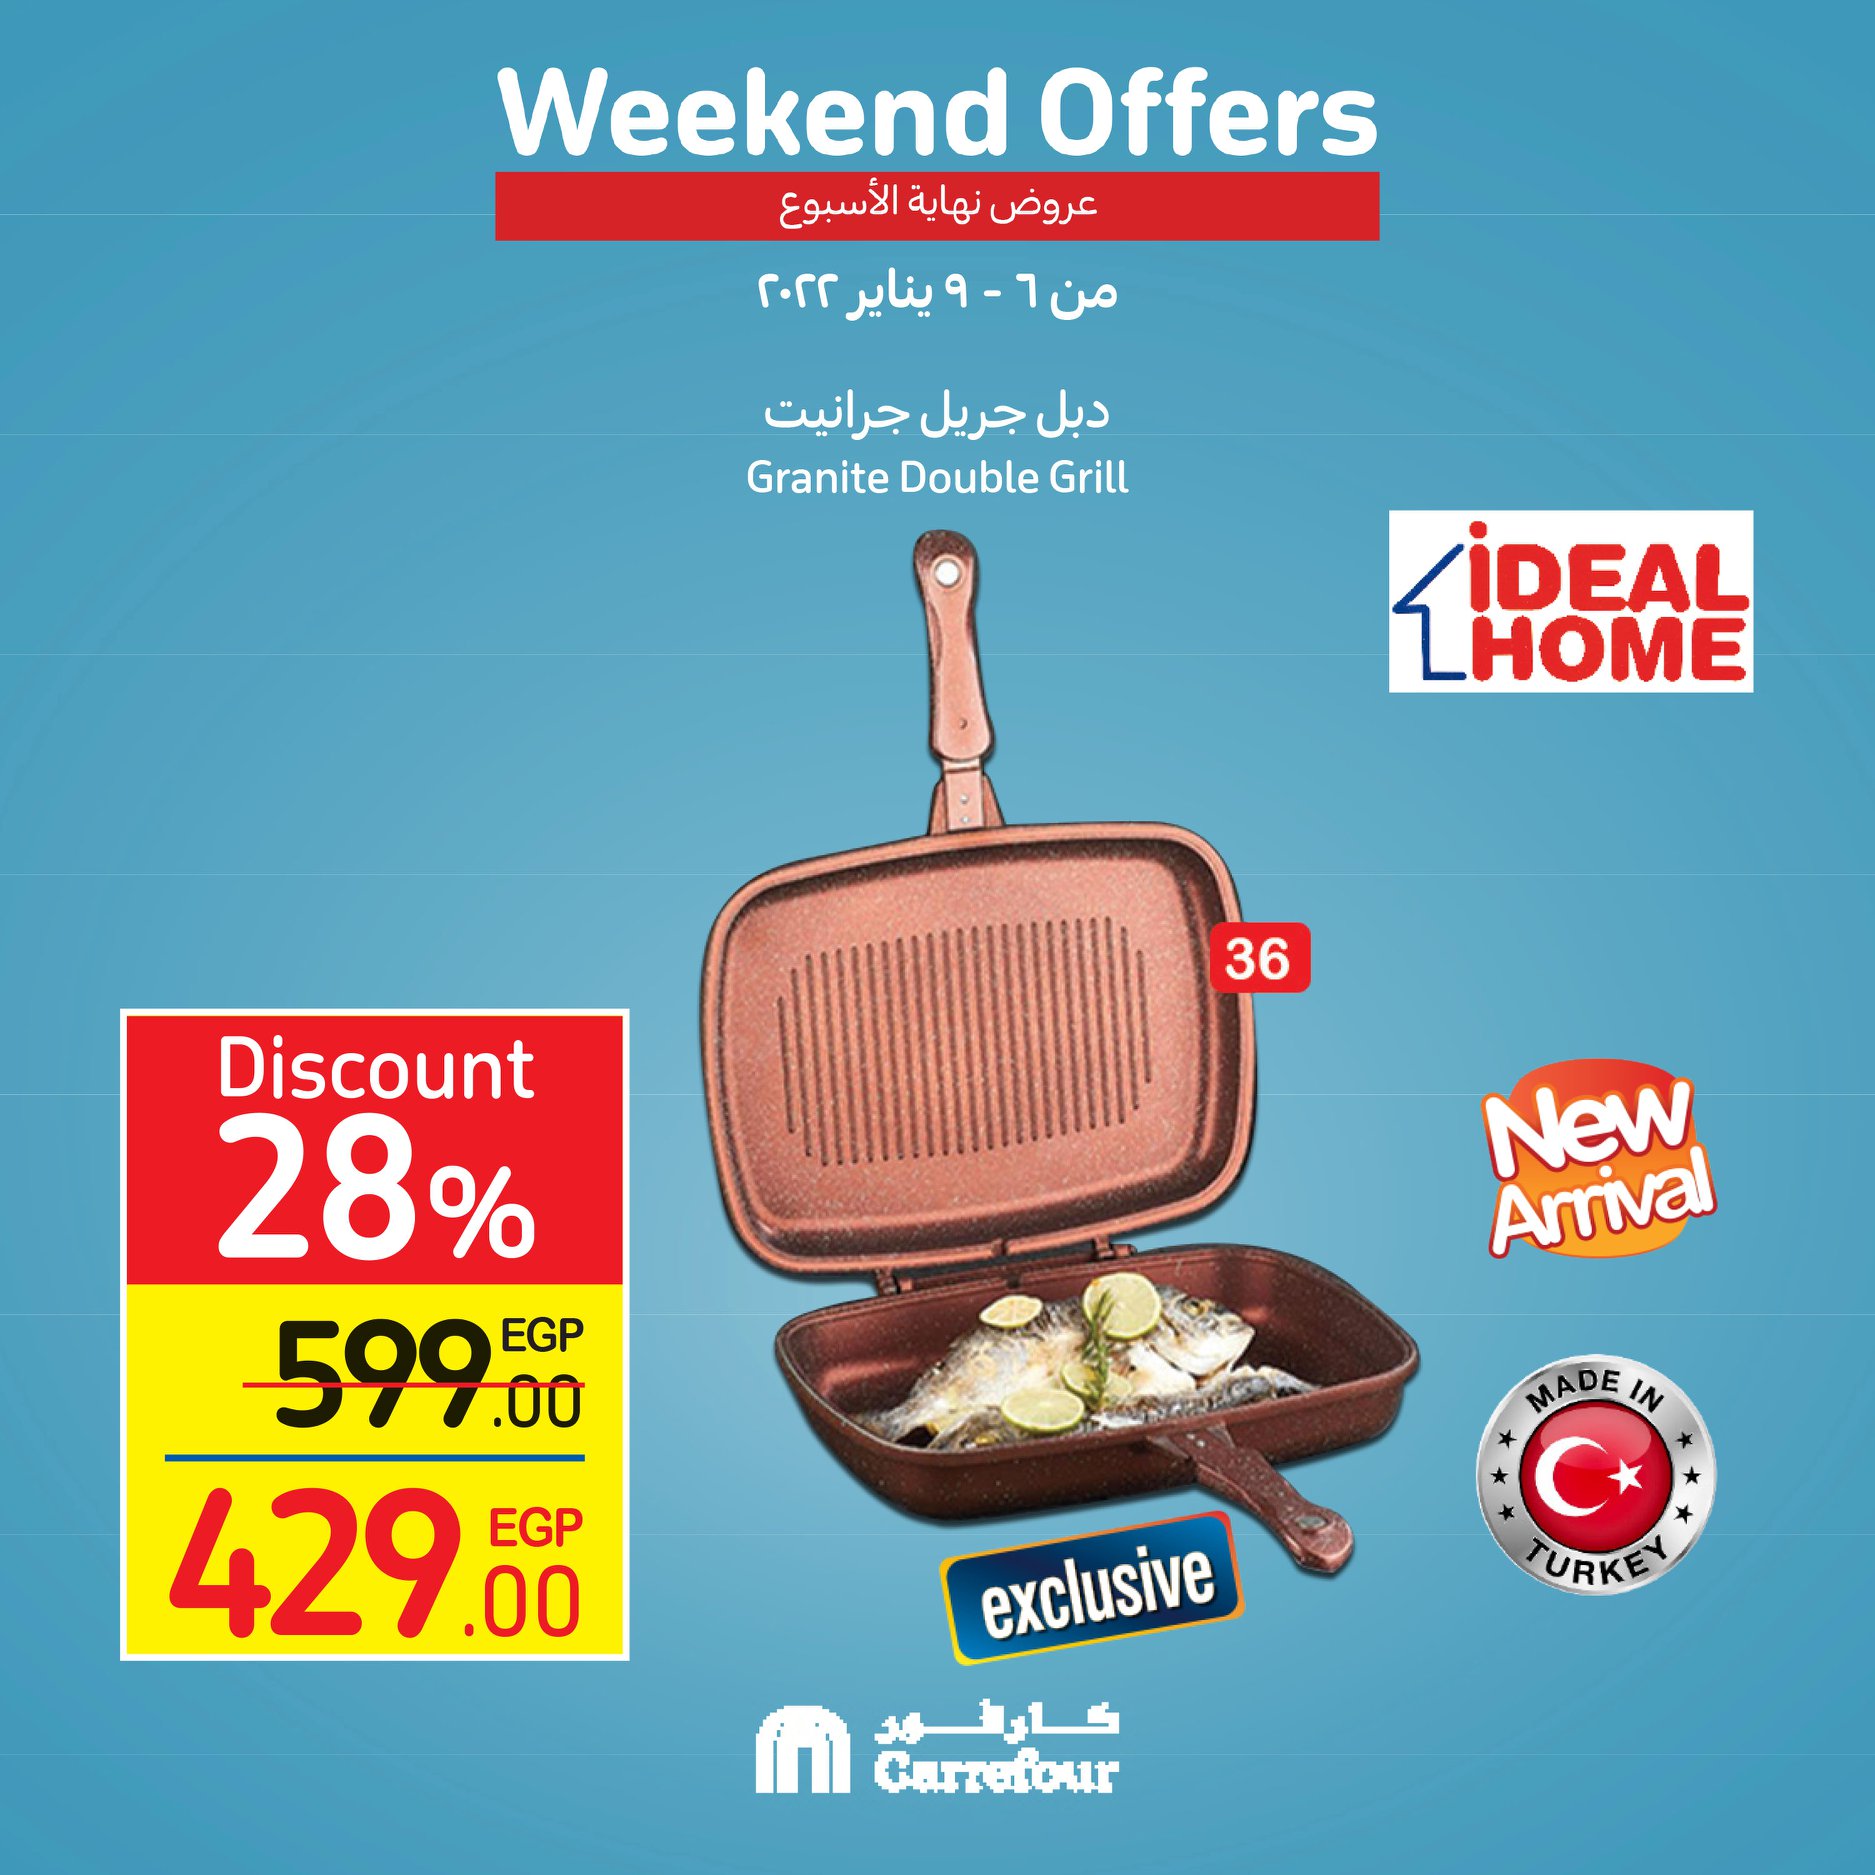 Now, the strongest Carrefour offers and surprises, half-price discounts, at Weekend until January 16th, 35